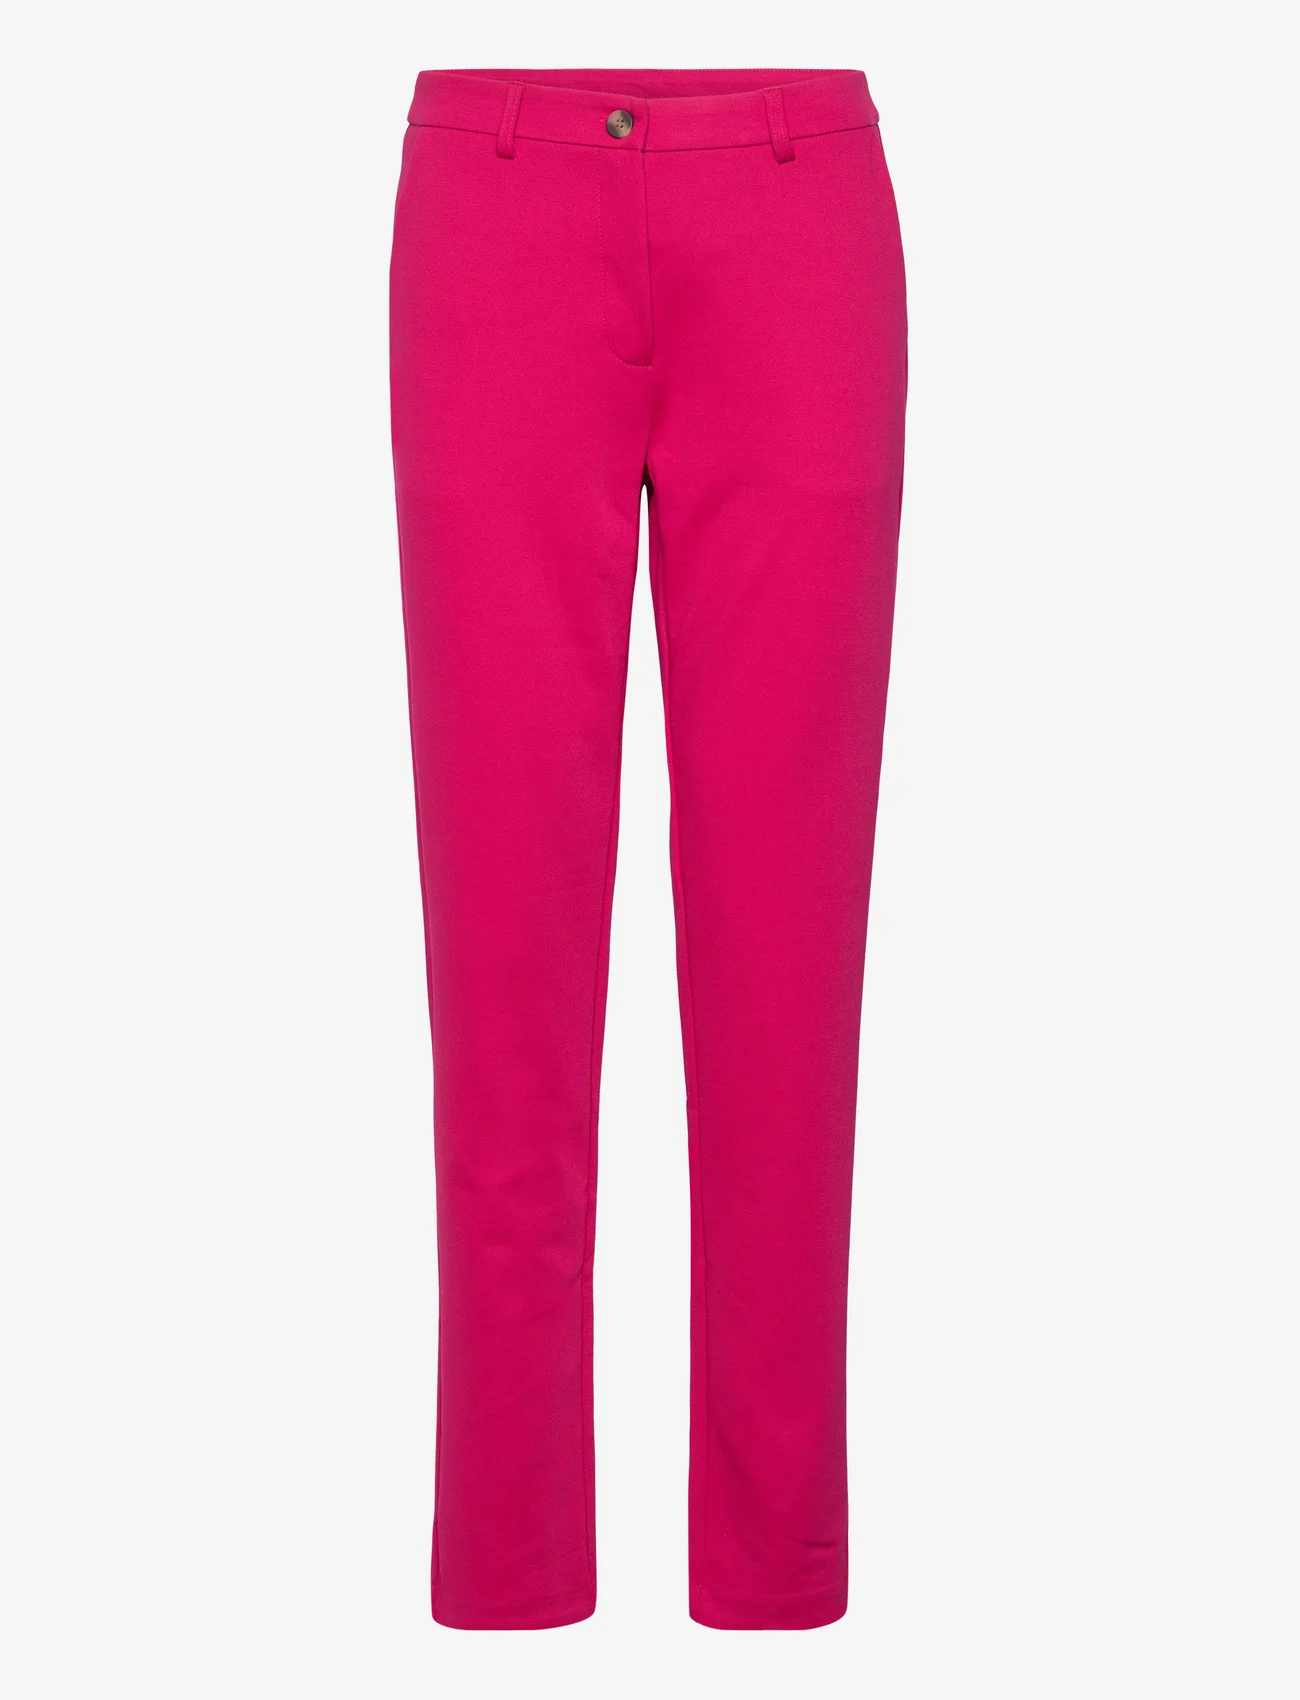 FREE/QUENT - FQNANNI-PANT - tailored trousers - cerise - 0